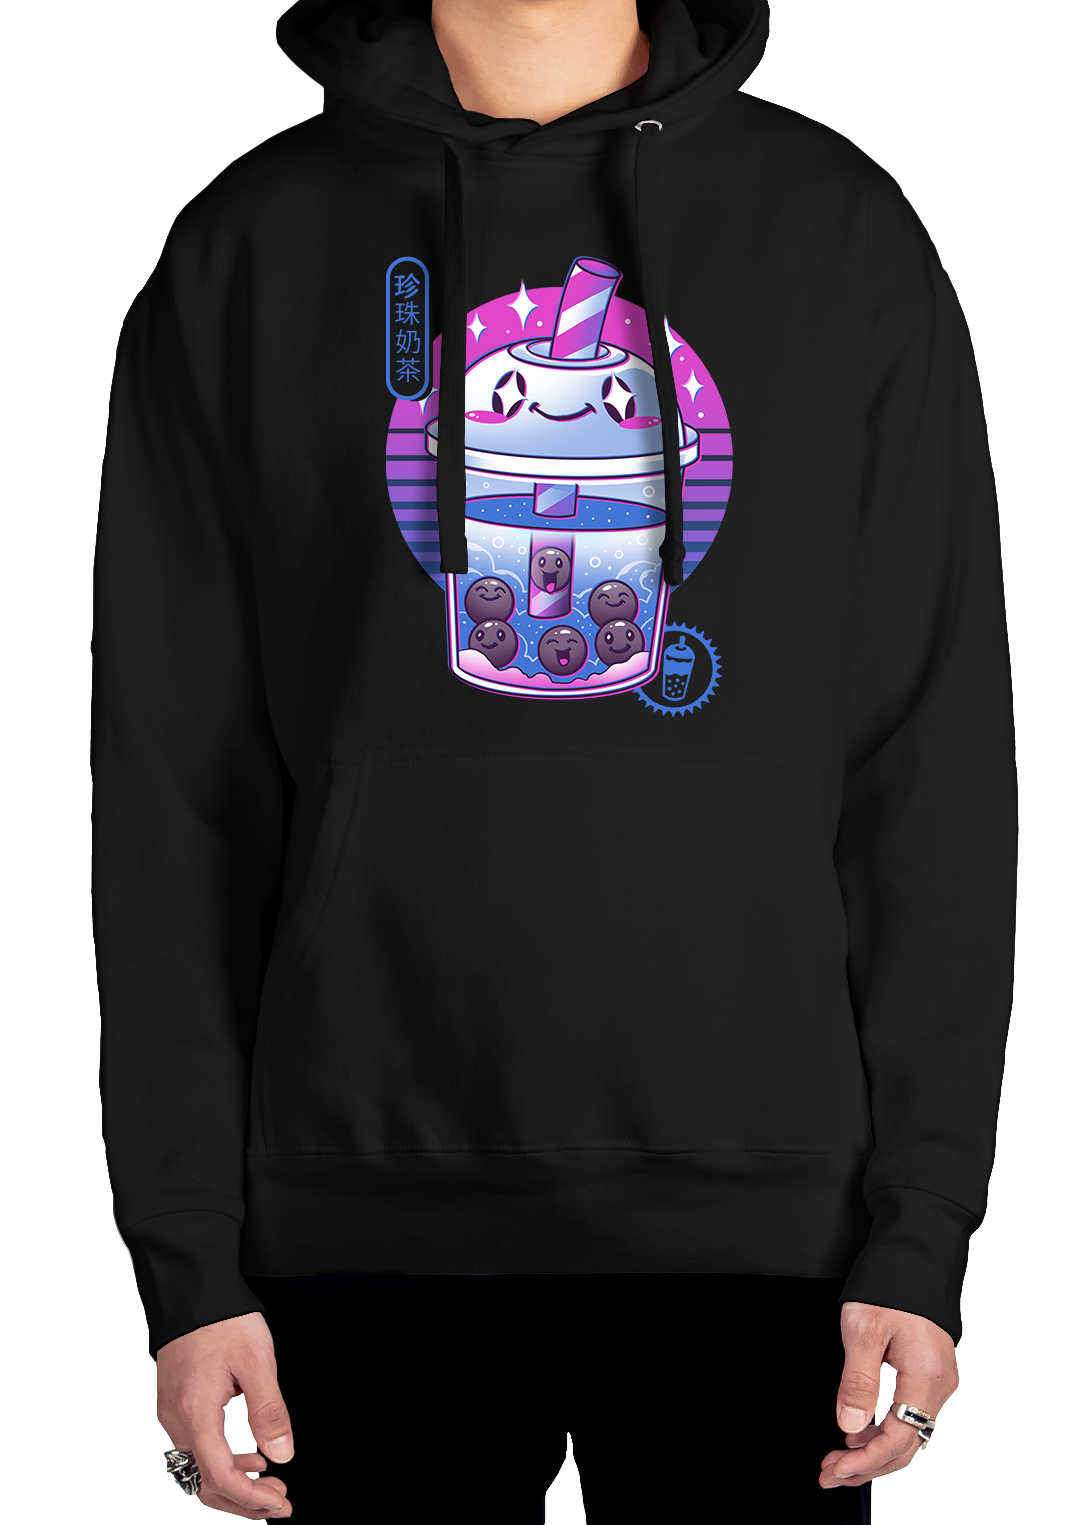 It's Boba Time Hoodie